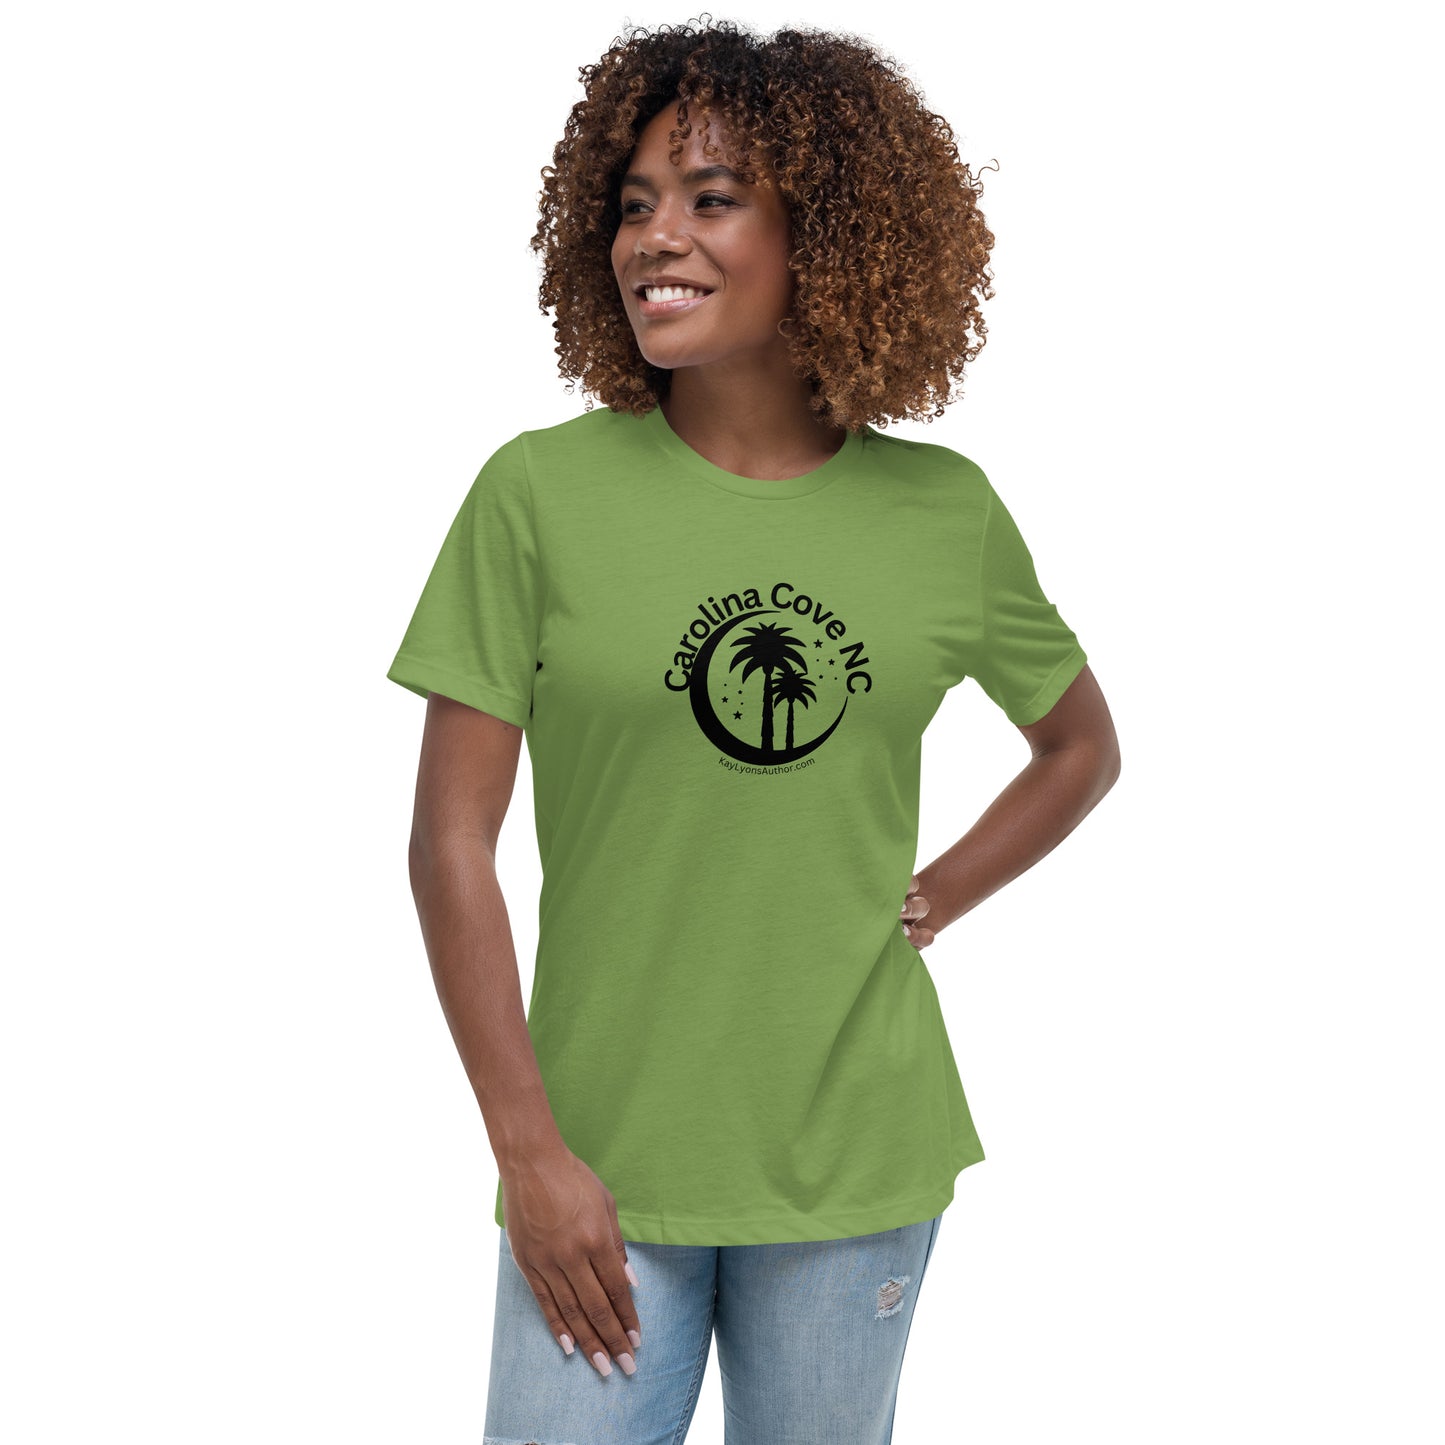 Women's Relaxed T-Shirt-FEATURING OUR FAVORITE FICTIONAL TOWN CAROLINA COVE NC